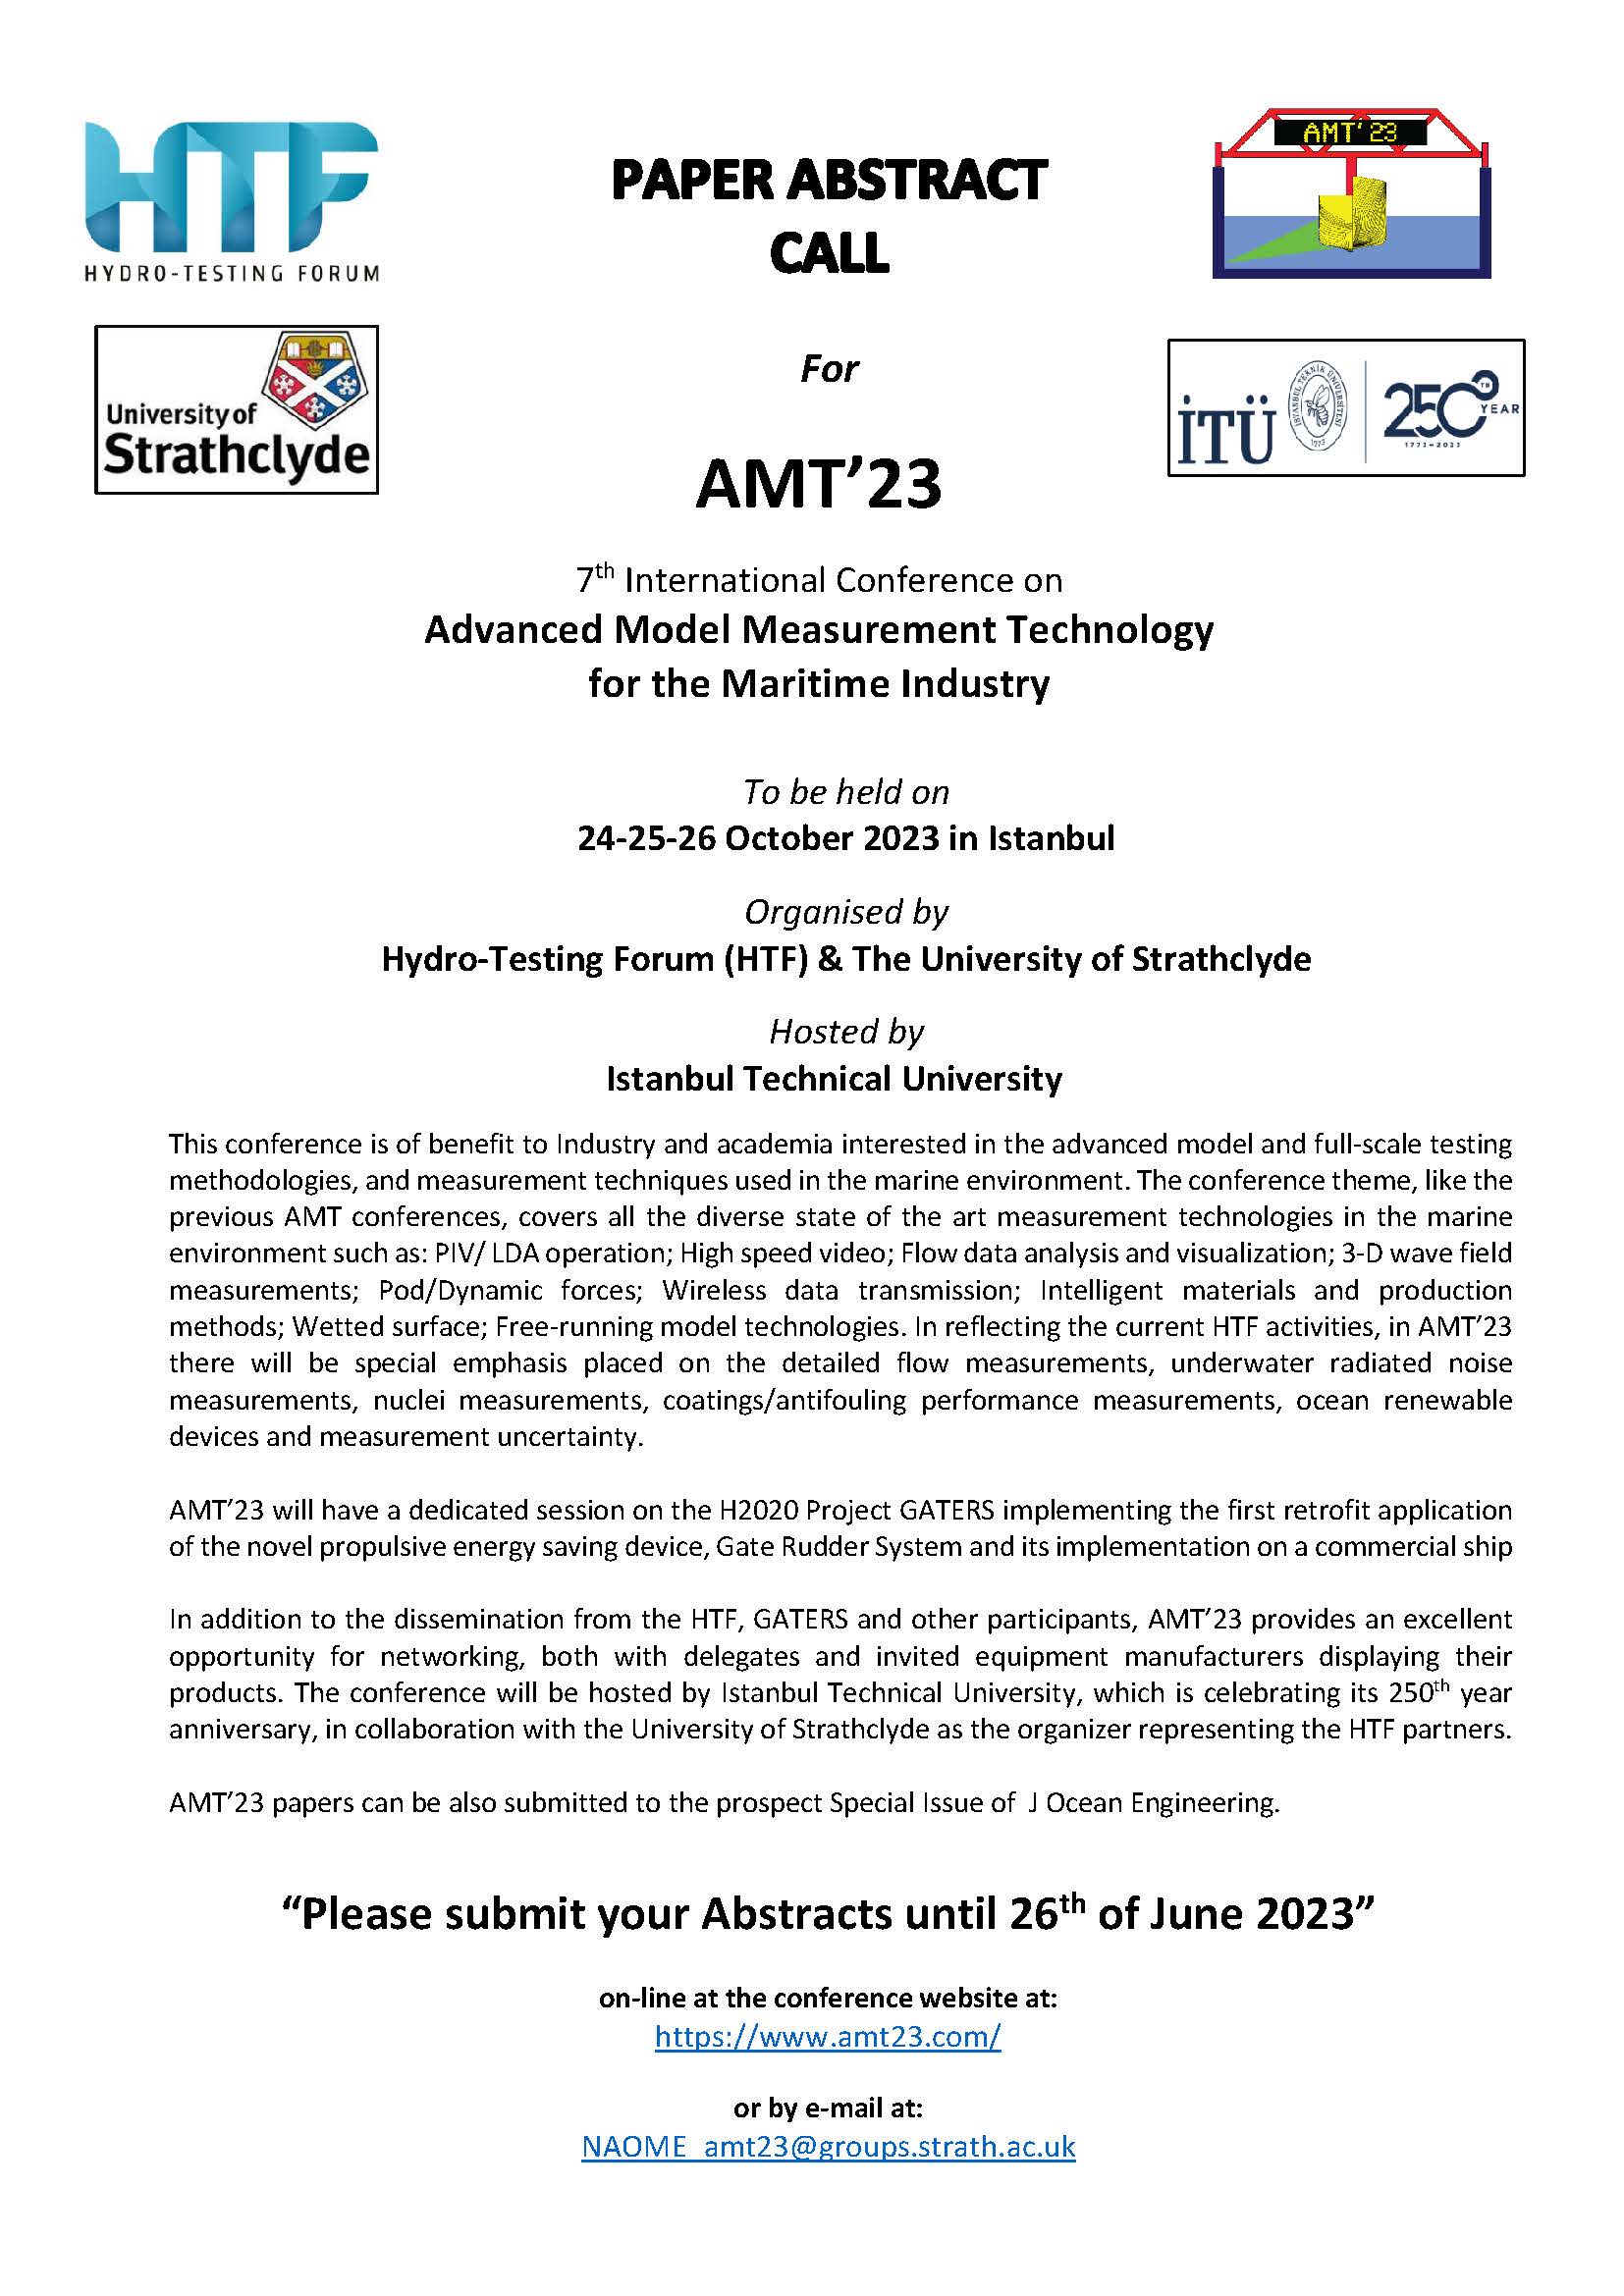 AMT'23_Call_Abstracts_MA_06June2023